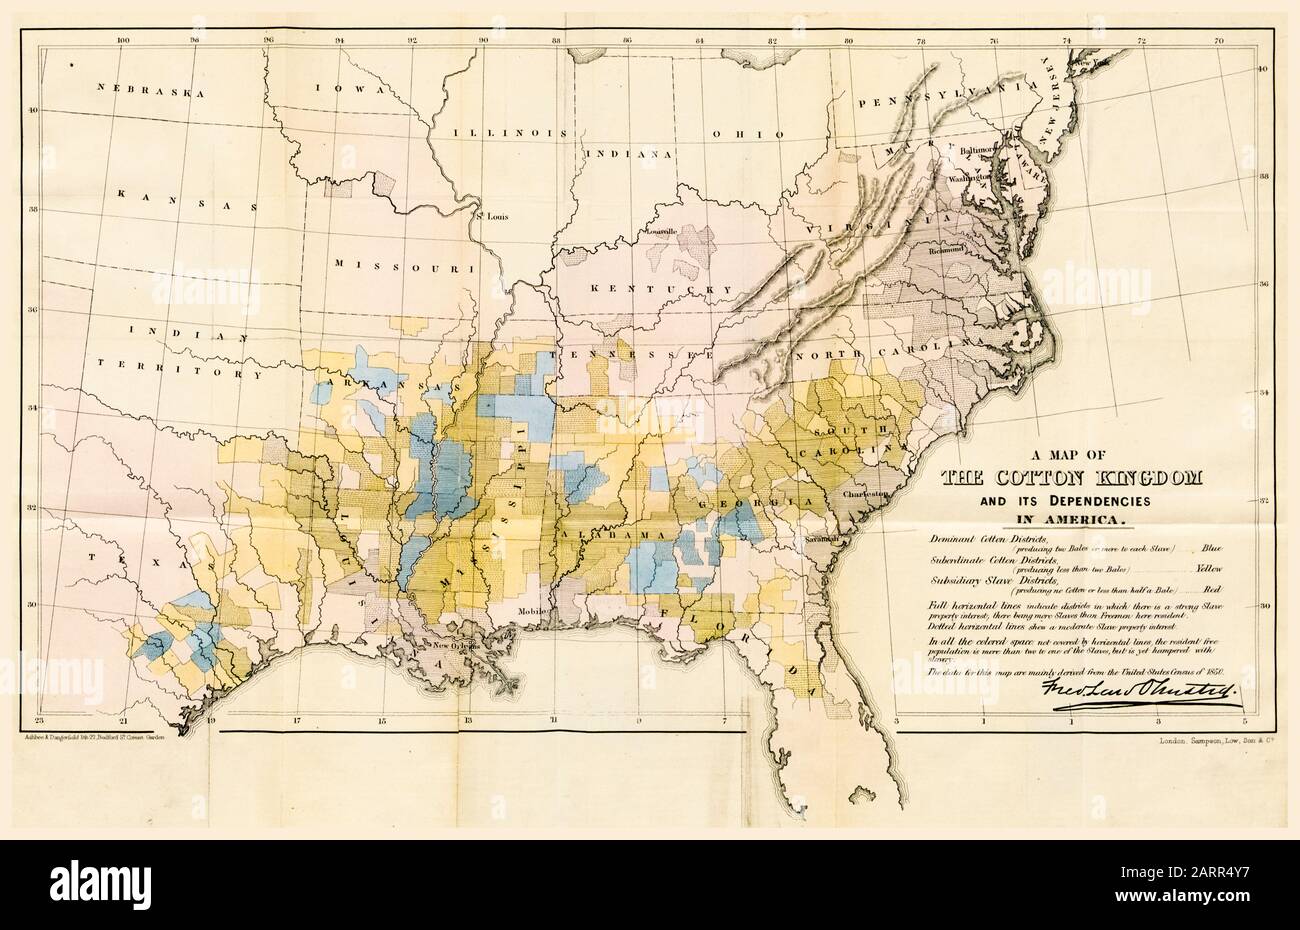 Map of Cotton Growing regions of the American South during the Slave Trade, published in 1861 Stock Photo